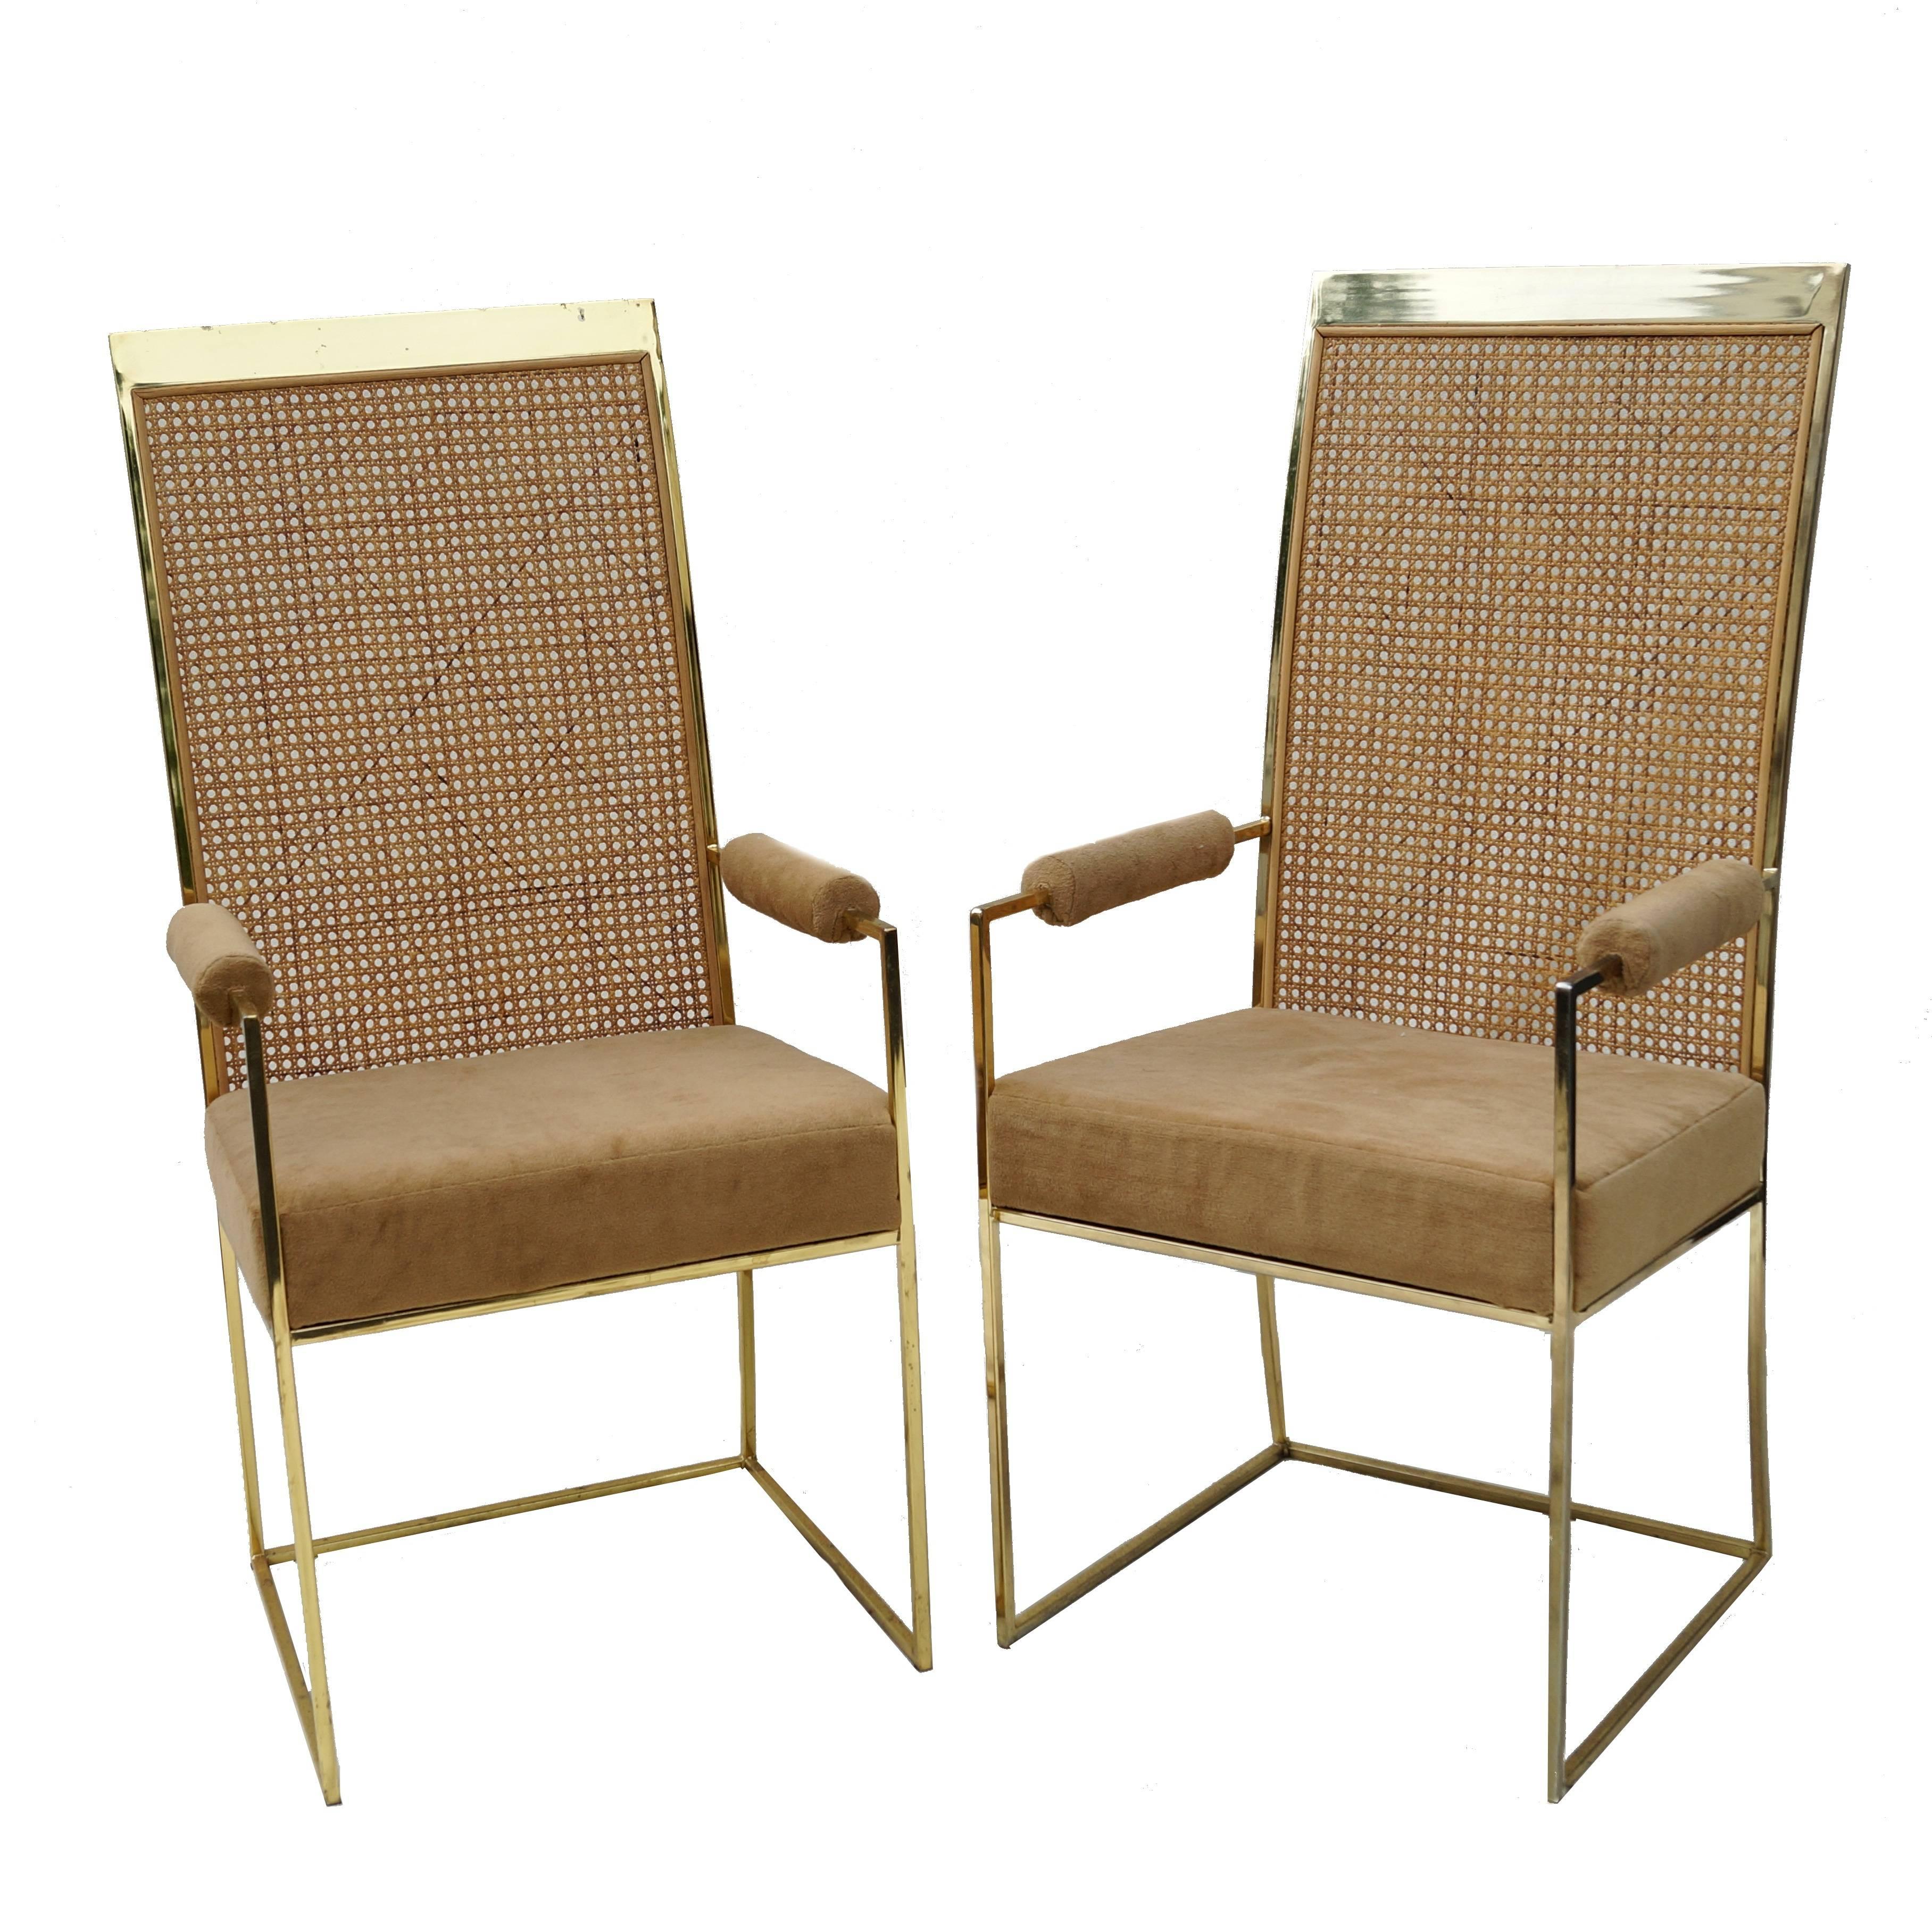 Milo Baughman for Thayer Coggin Brass Tone Cane Back Arm or Dining Chairs, Pair